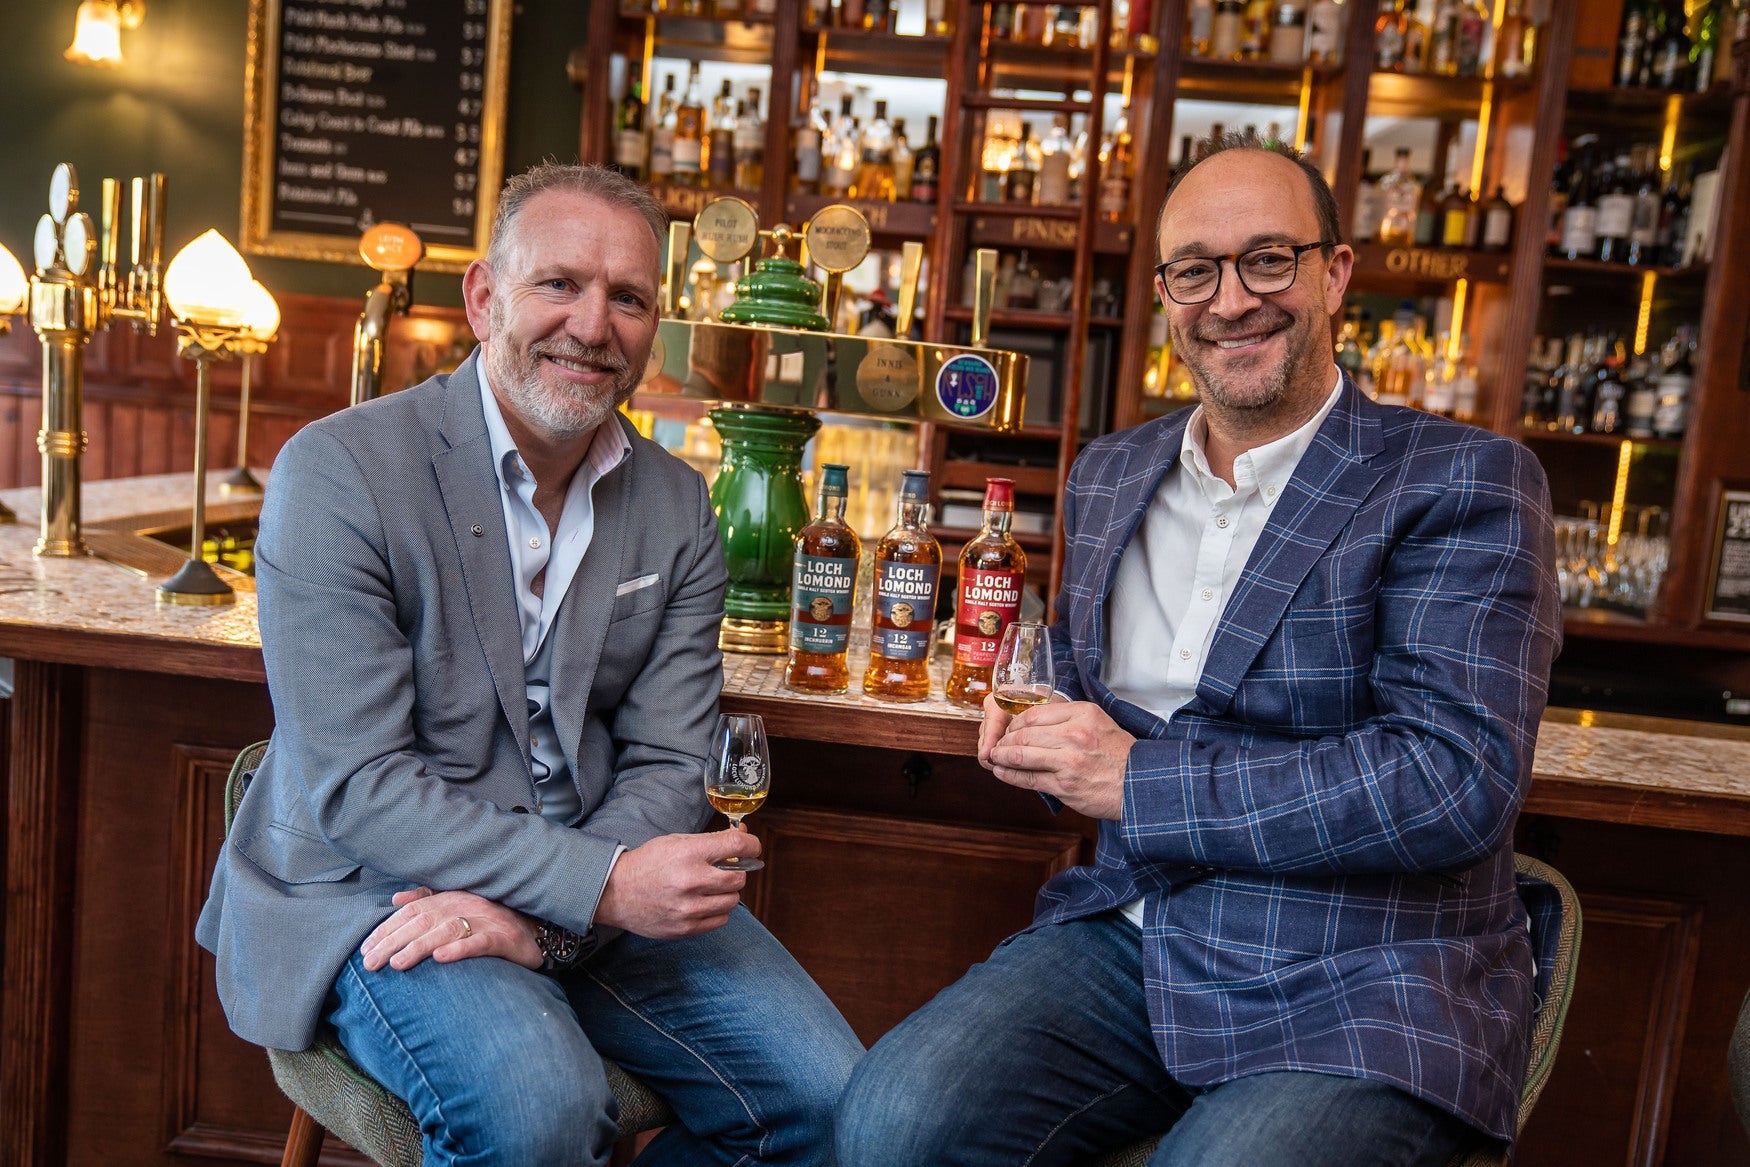 Andy Nicol and Giles Morgan Team Up for New Sports Podcast in partnership with Loch Lomond Whiskies - Loch Lomond Group